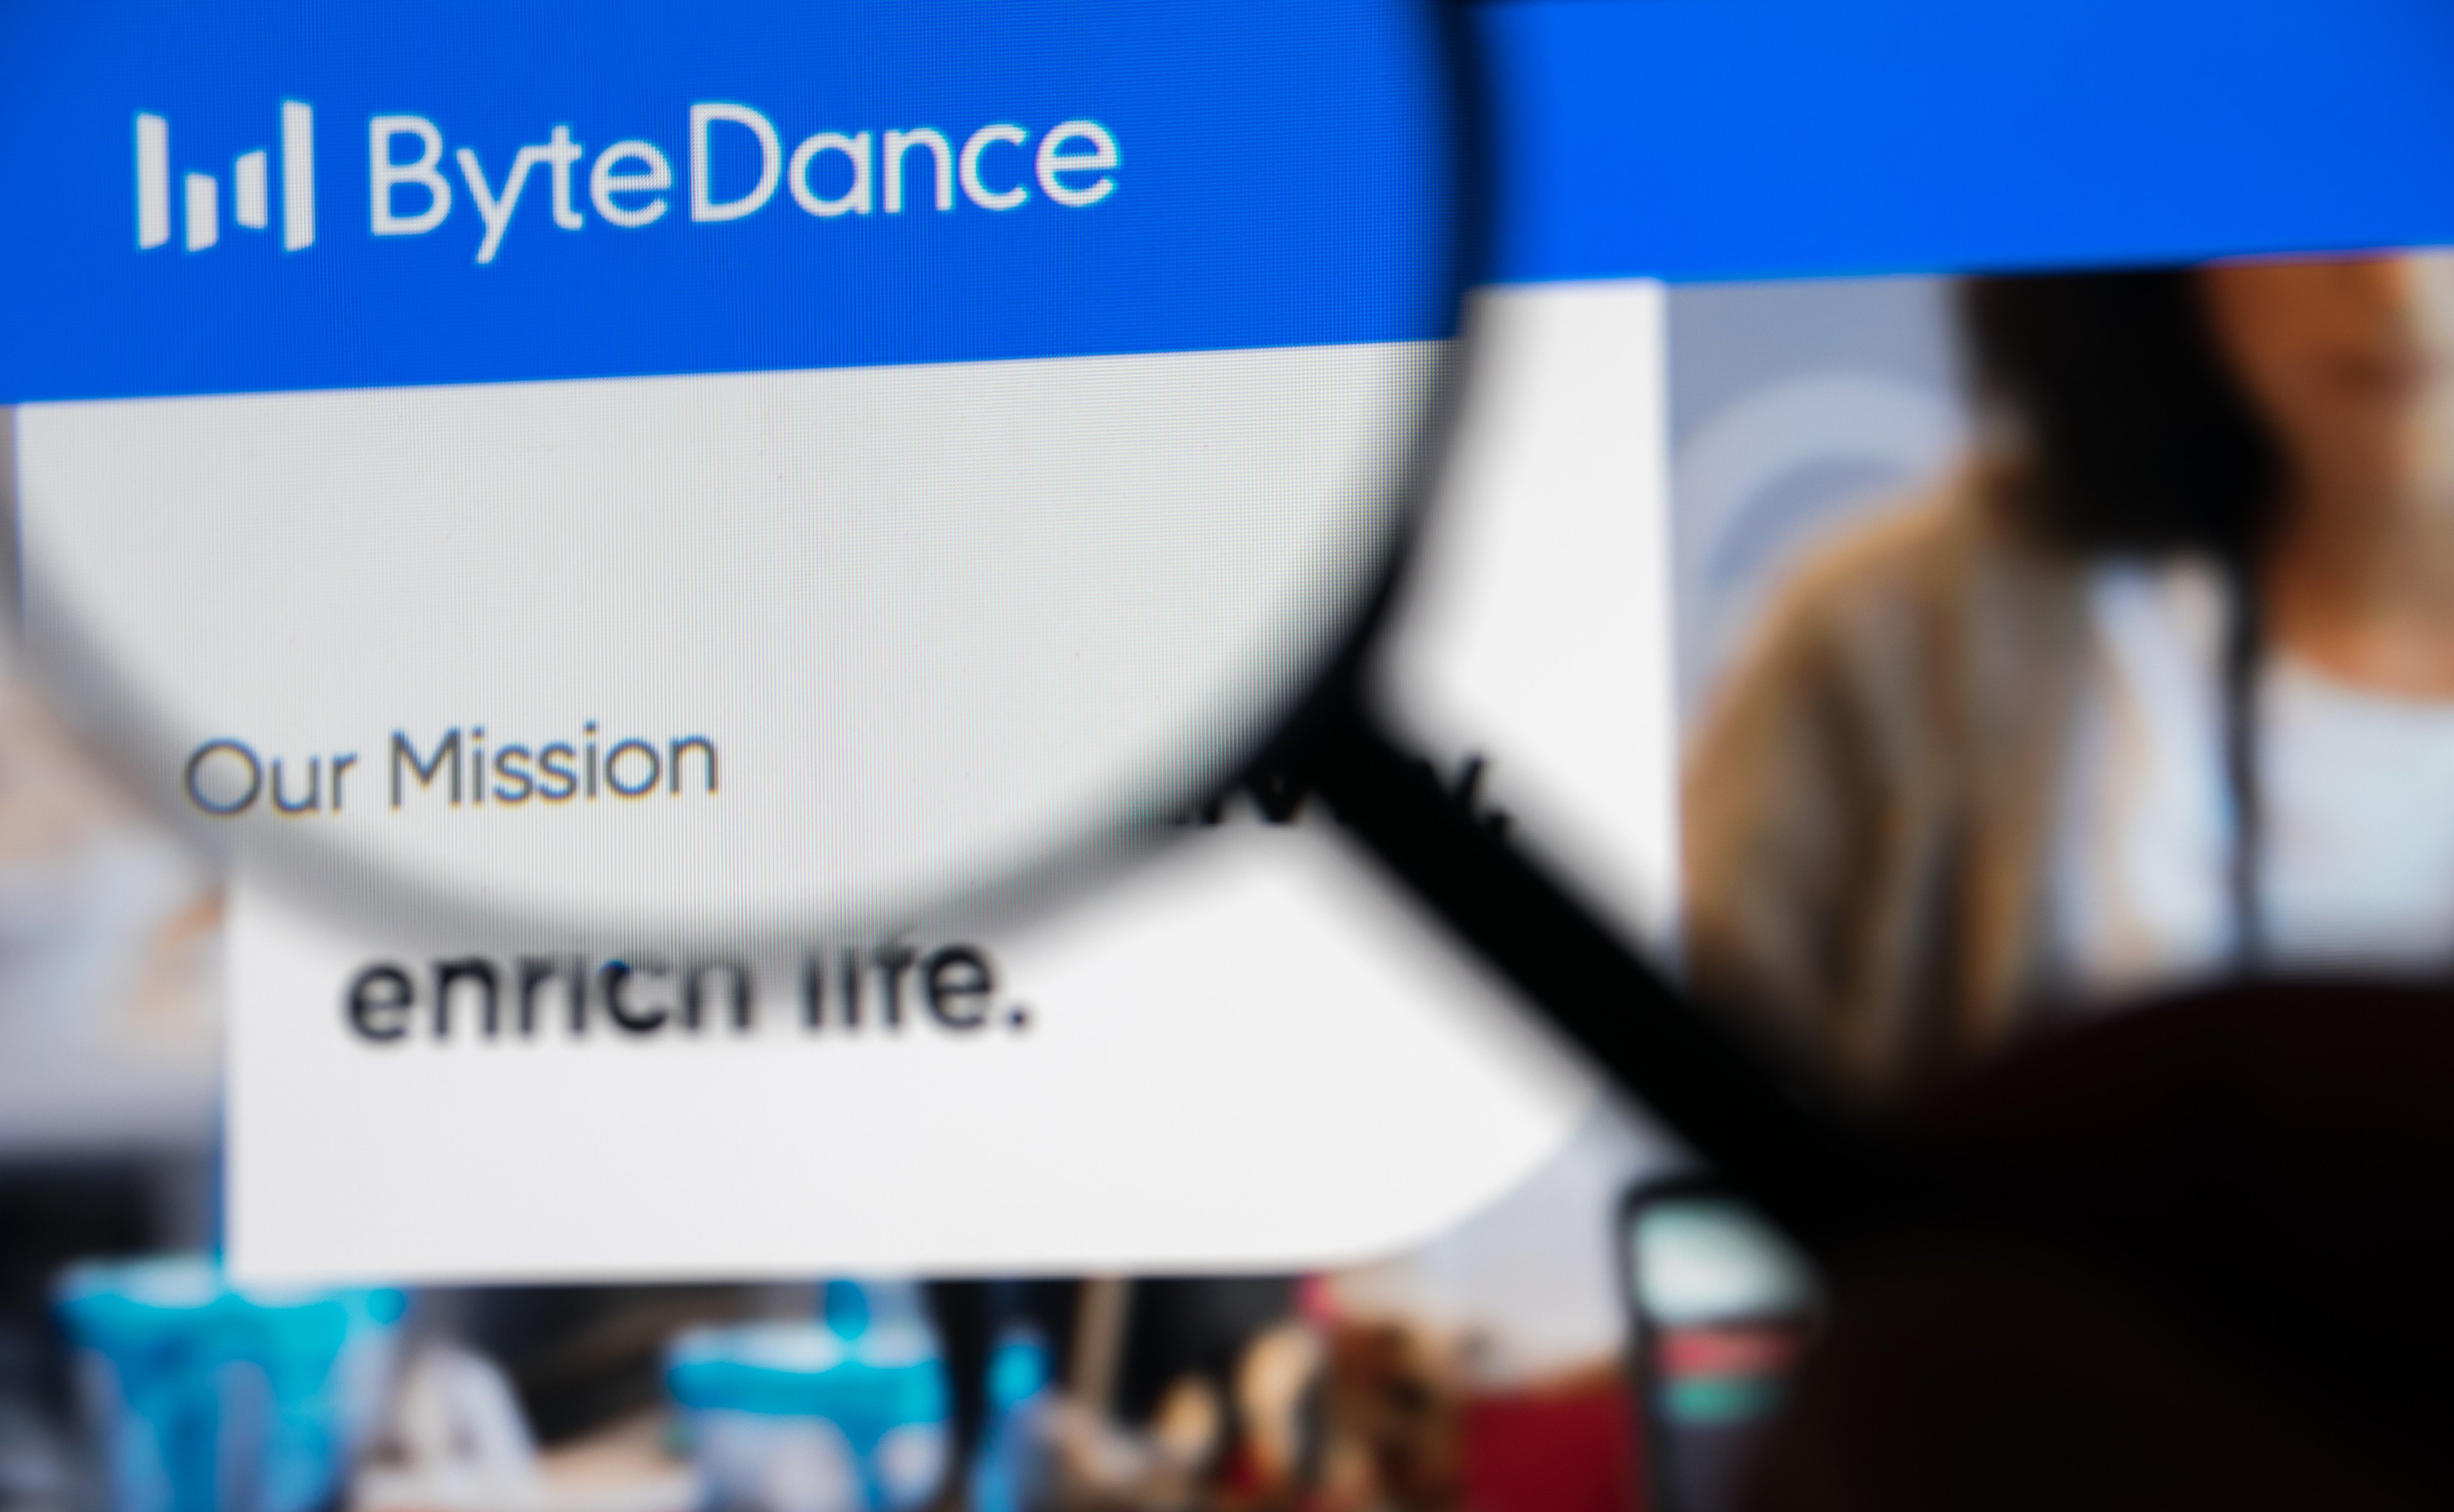 ByteDance has become the latest company to be caught up in public debate about the technology industry’s demanding work culture following the collapse of a young employee. Photo: Shutterstock